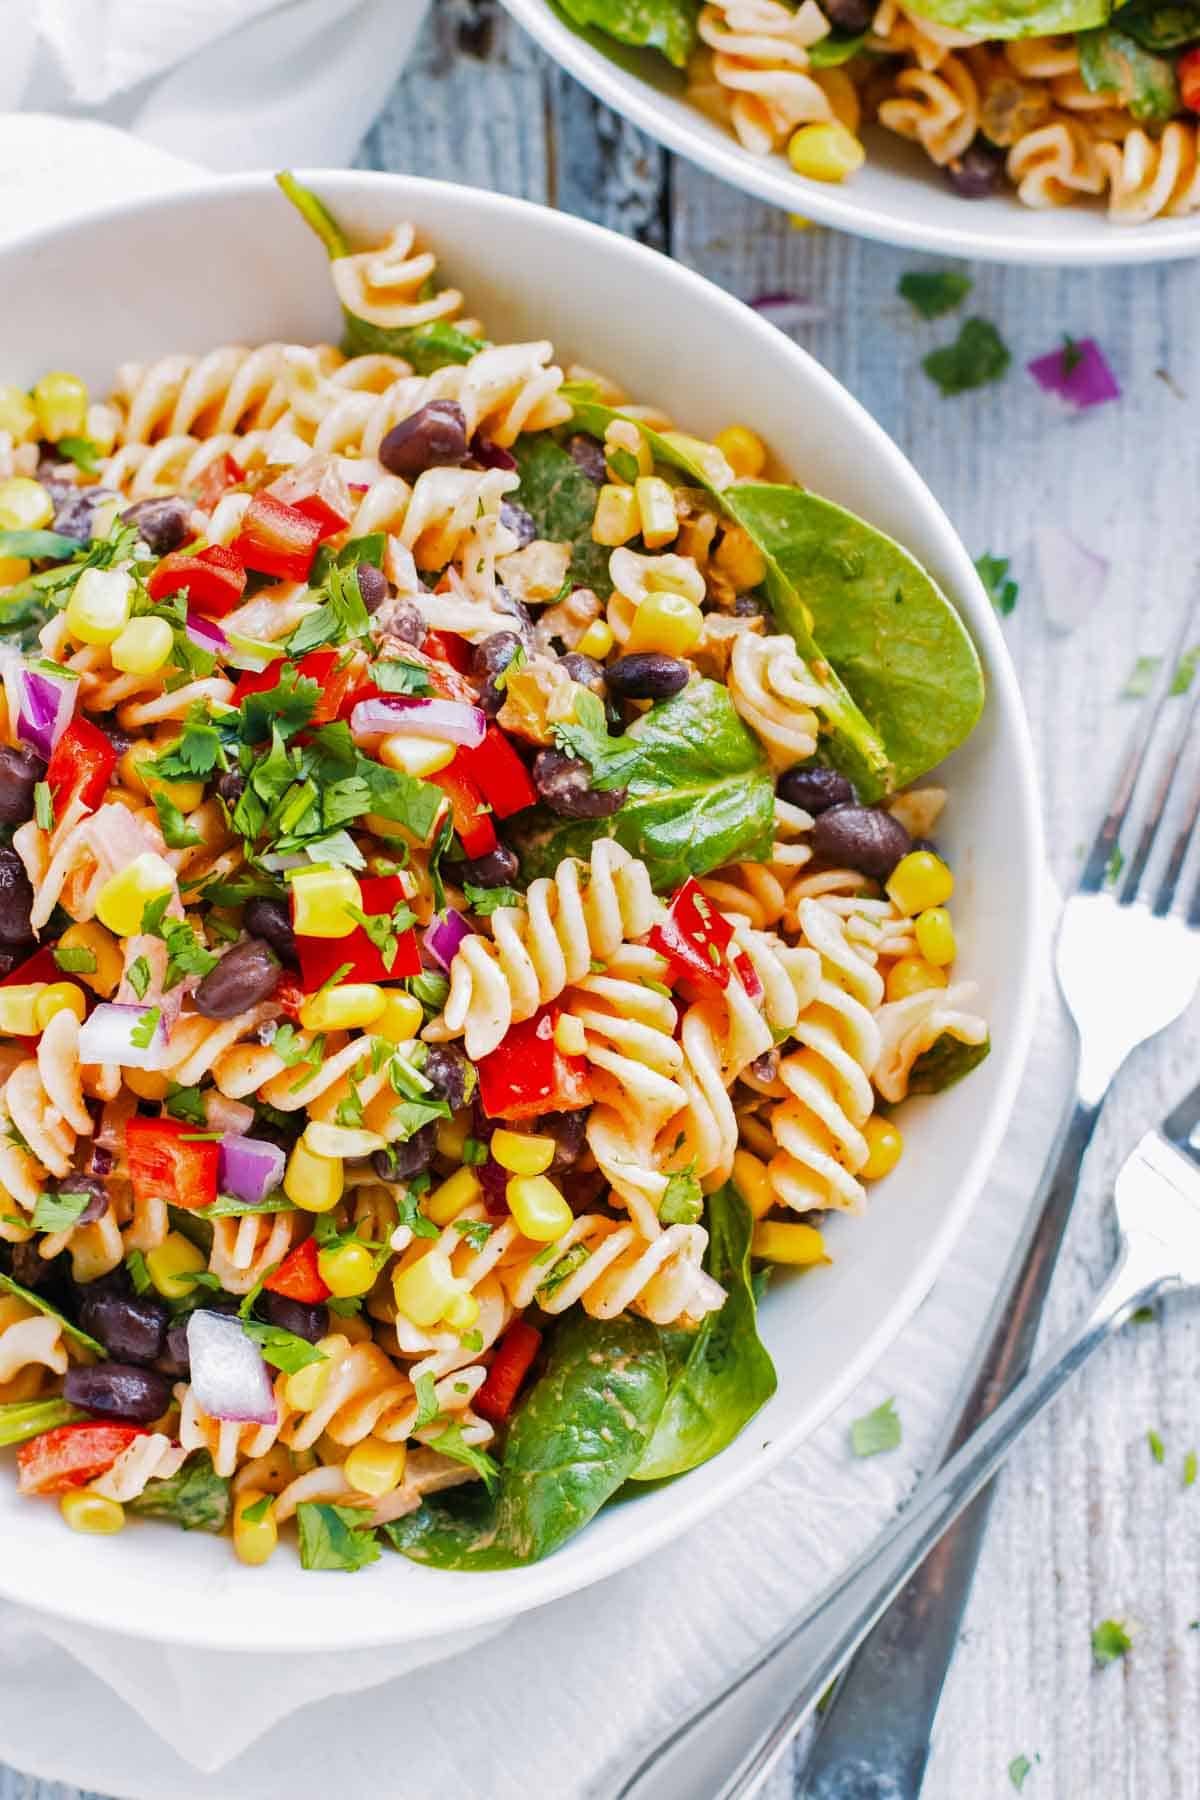 Mexican Pasta Salad with Salsa Ranch RECIPE served in a white glass bowl.